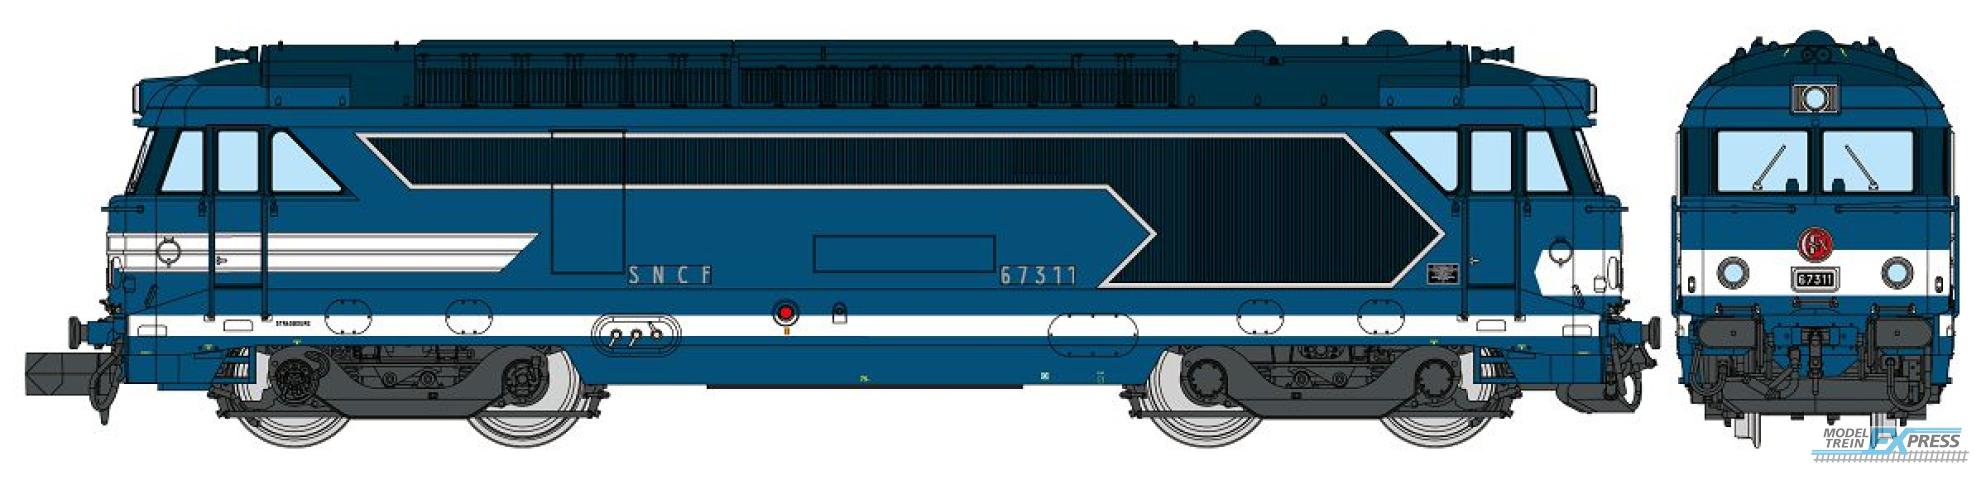 REE models NW-325S BB 67311 Blue livery with raised road, number plates, STRASBOURG, Era III-IV DCC SOUND